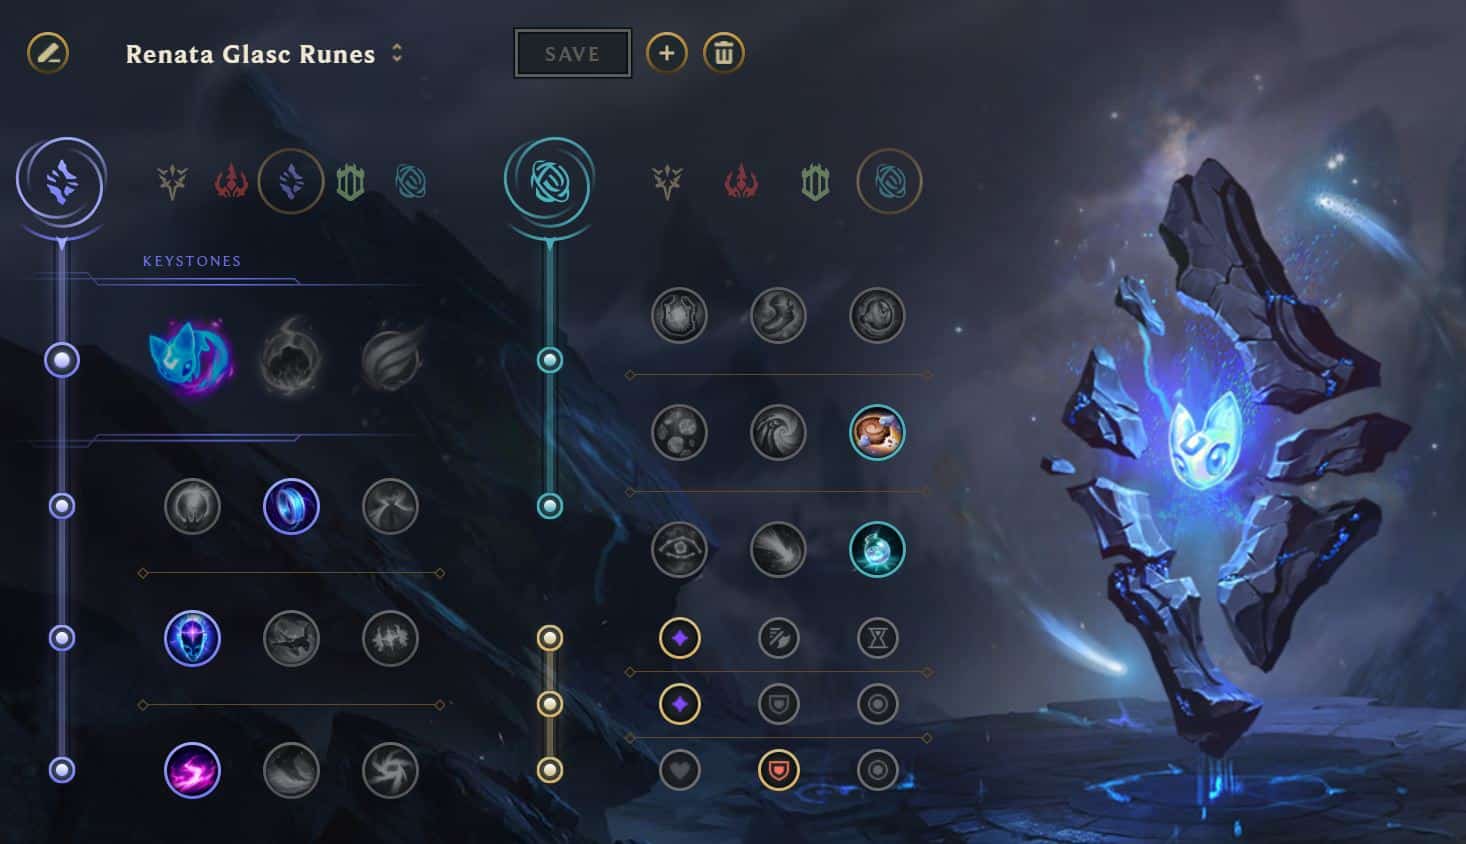 Renata Glasc example rune page in League of Legends Season 12 with Summon Aery